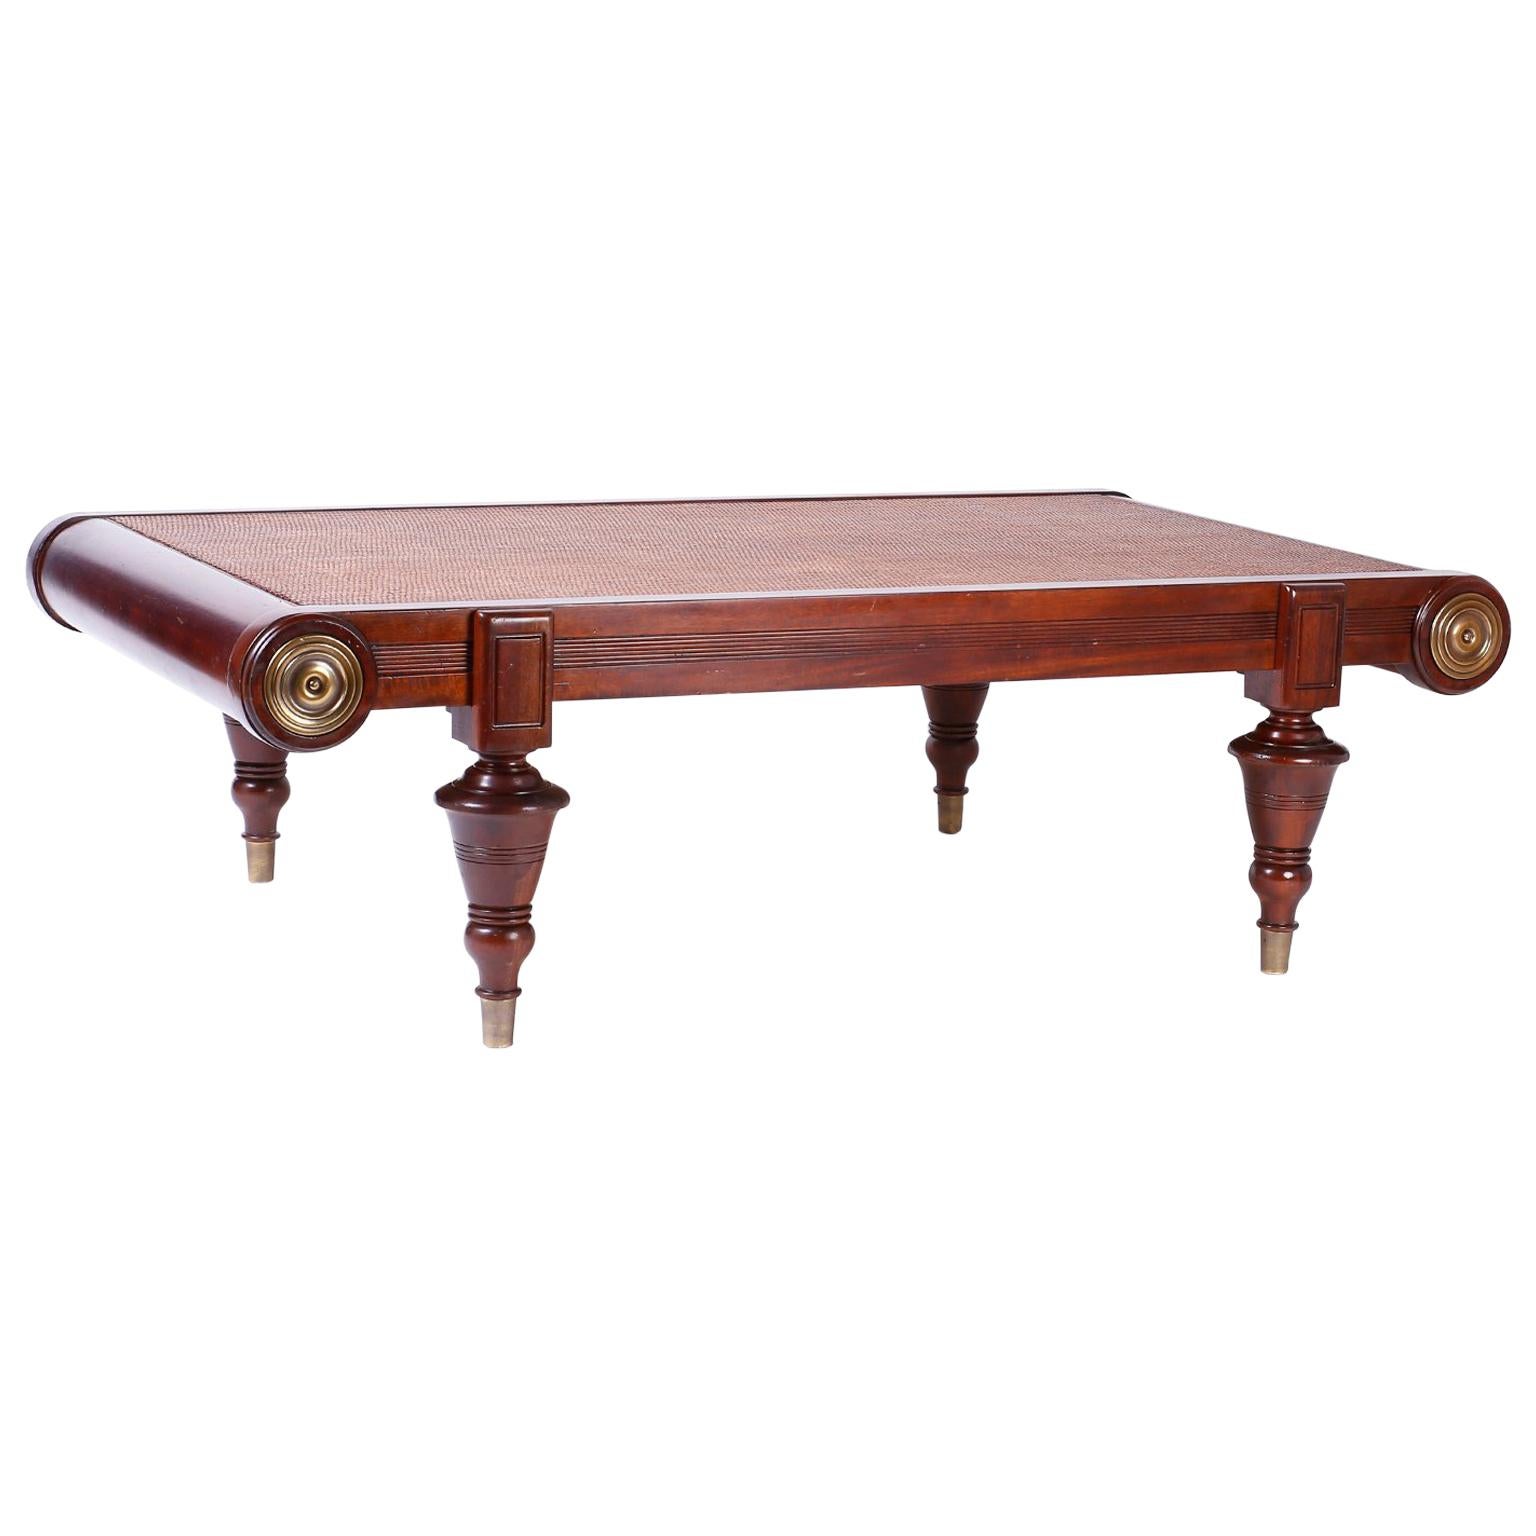 British Colonial Coffee Table